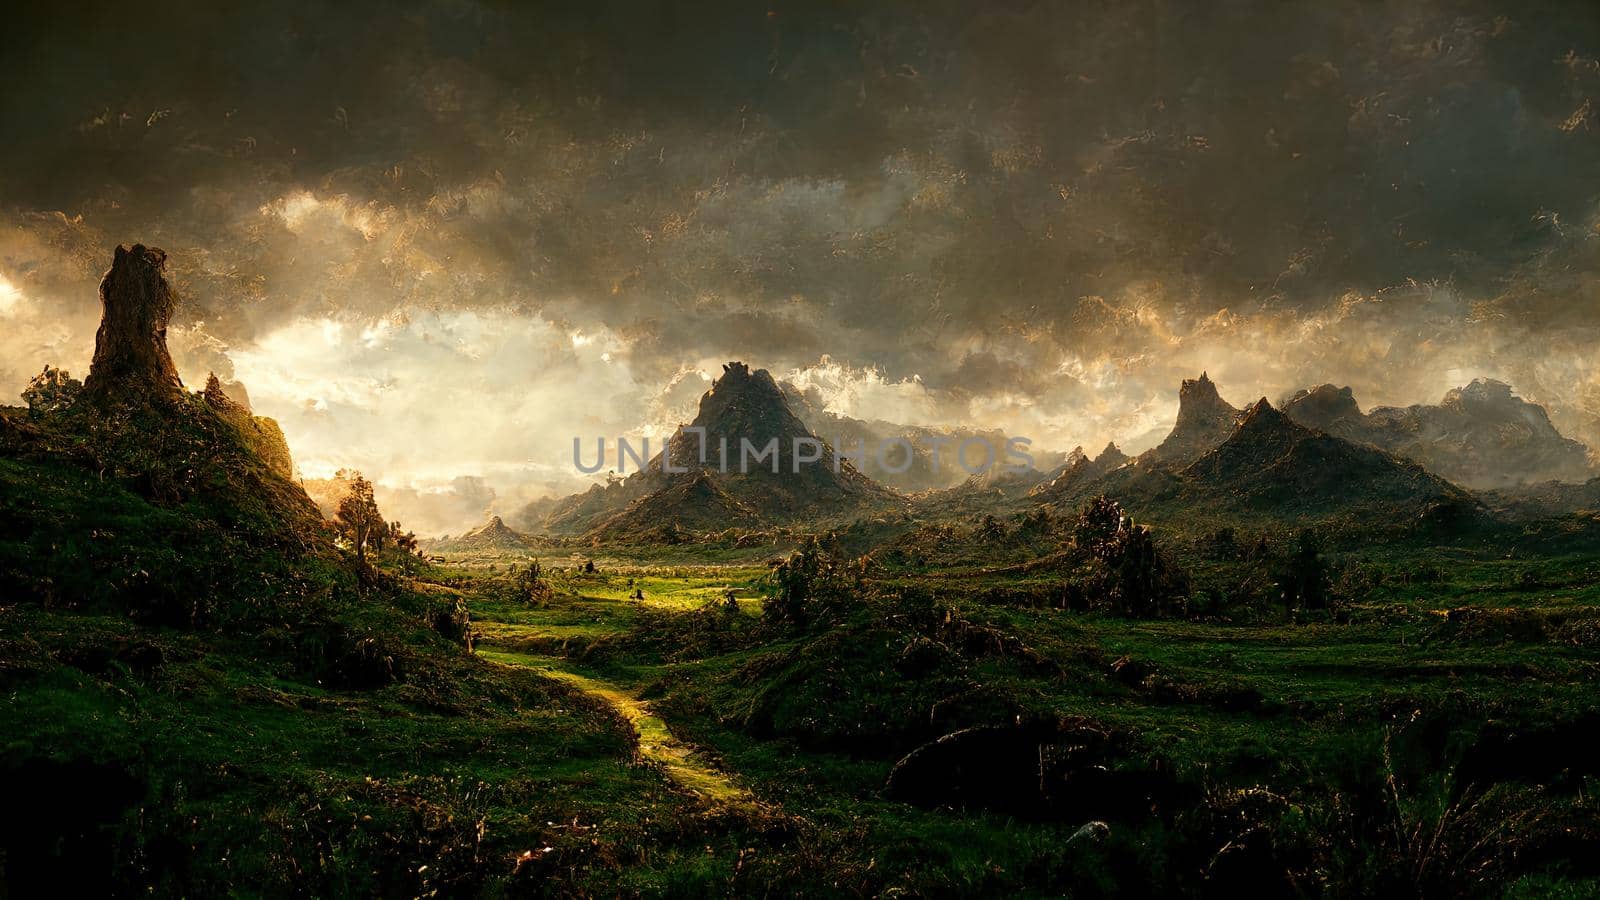 landscape plain with lush green grass and gloomy mountains in the background at dawn